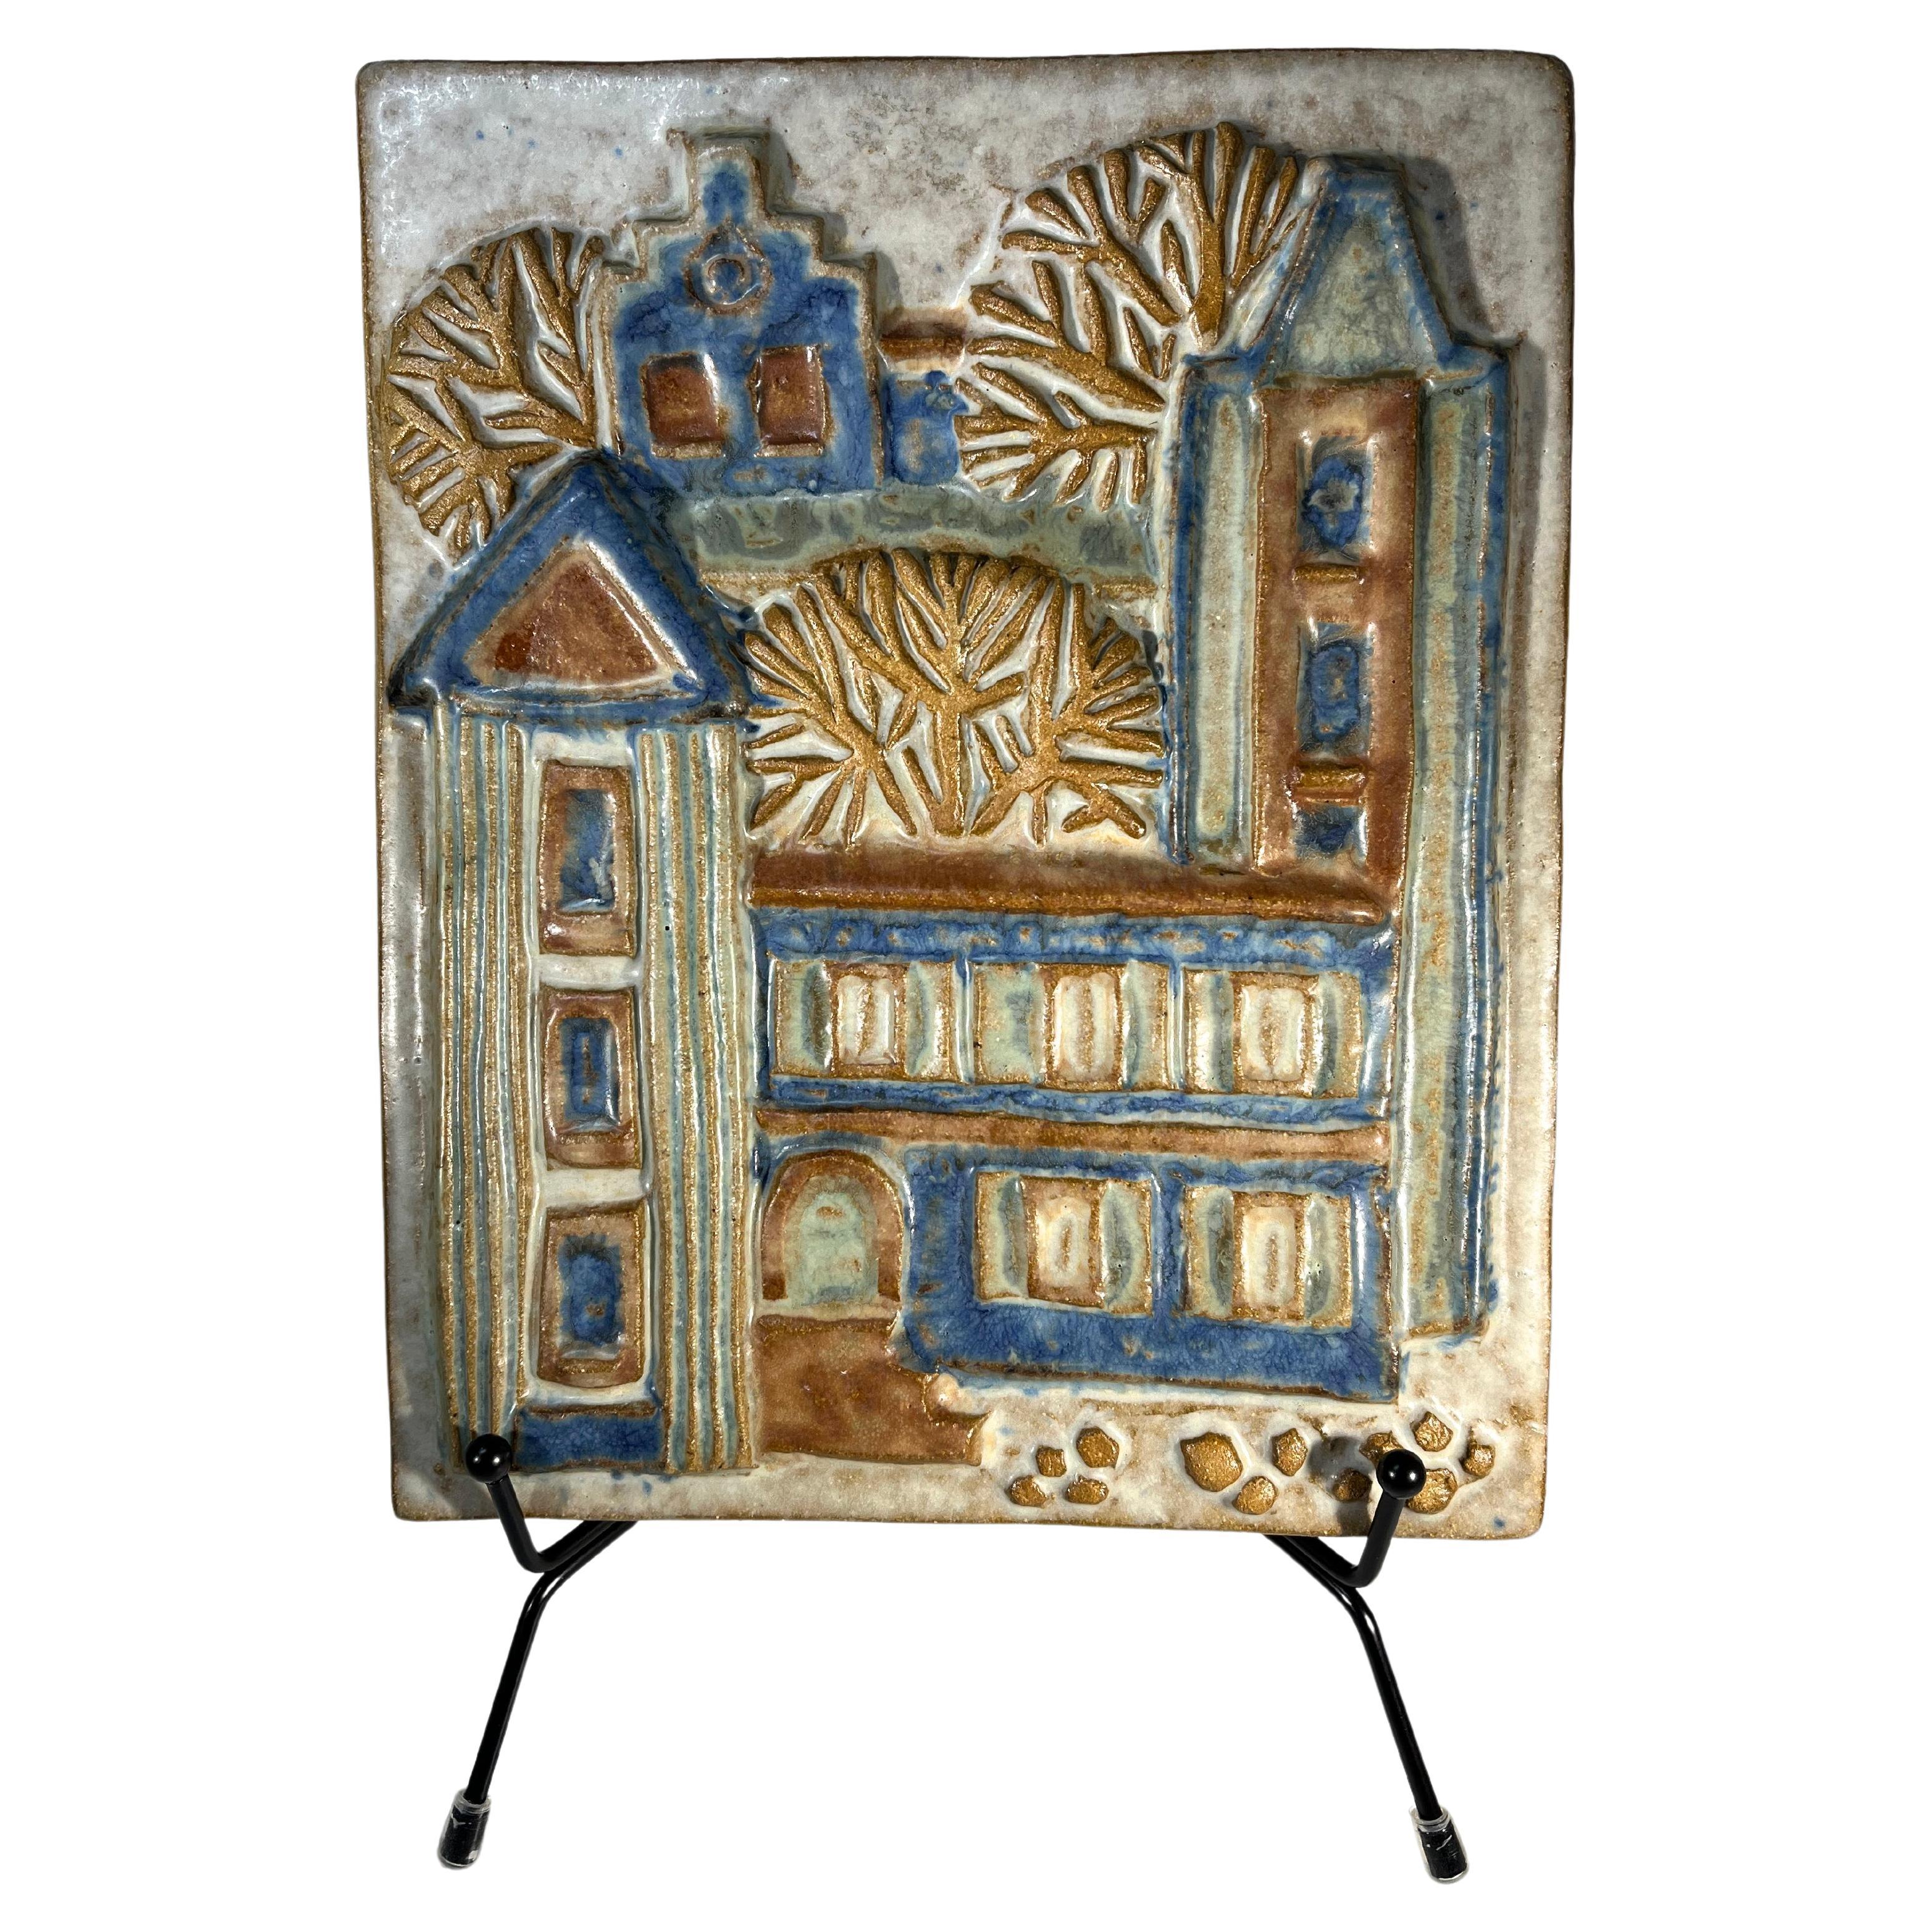 Bornholm Town By Marianne Starck For Michael Andersen. Danish Wall Plaque For Sale